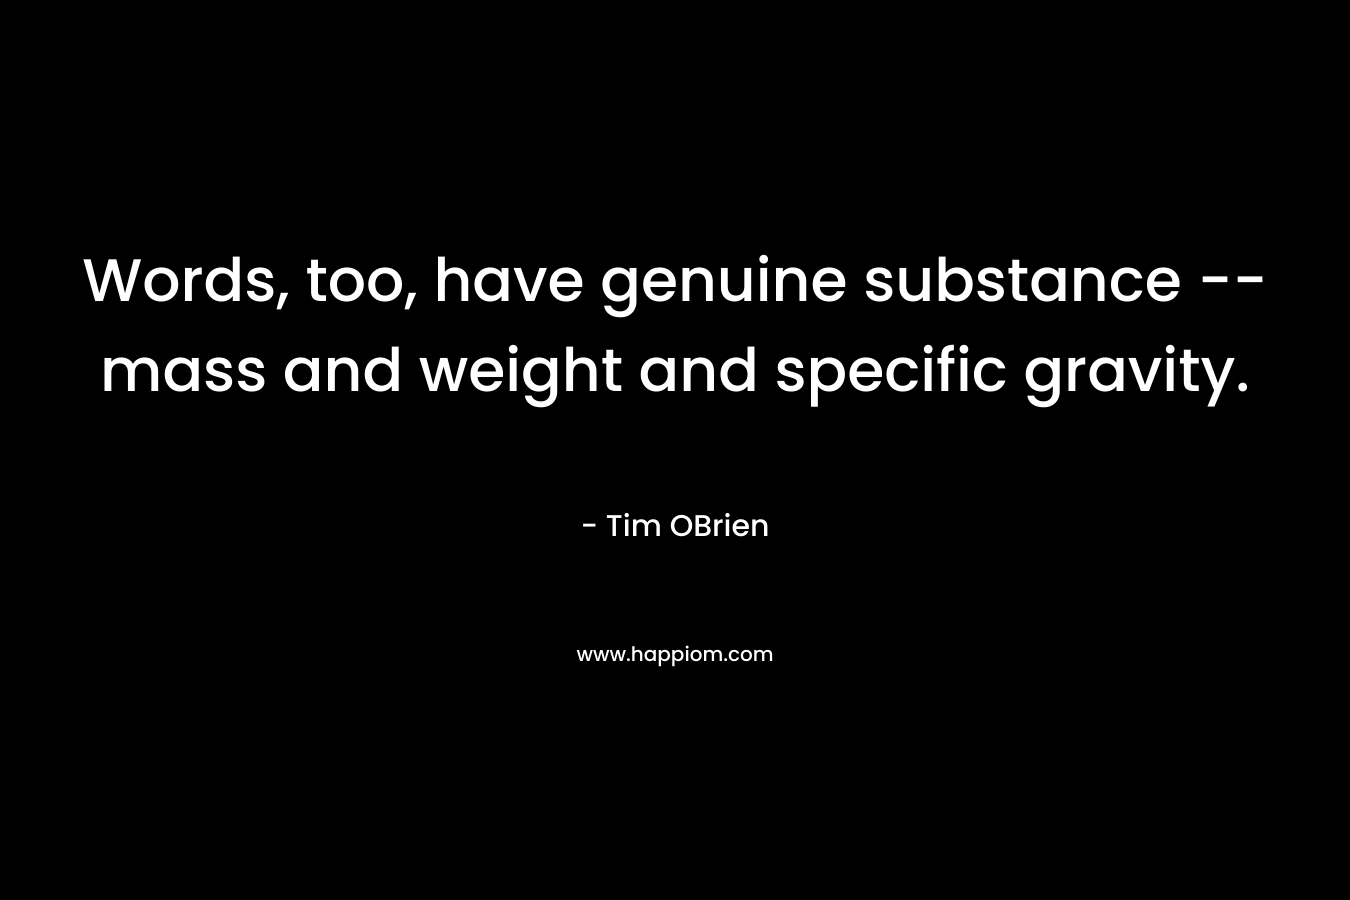 Words, too, have genuine substance -- mass and weight and specific gravity.